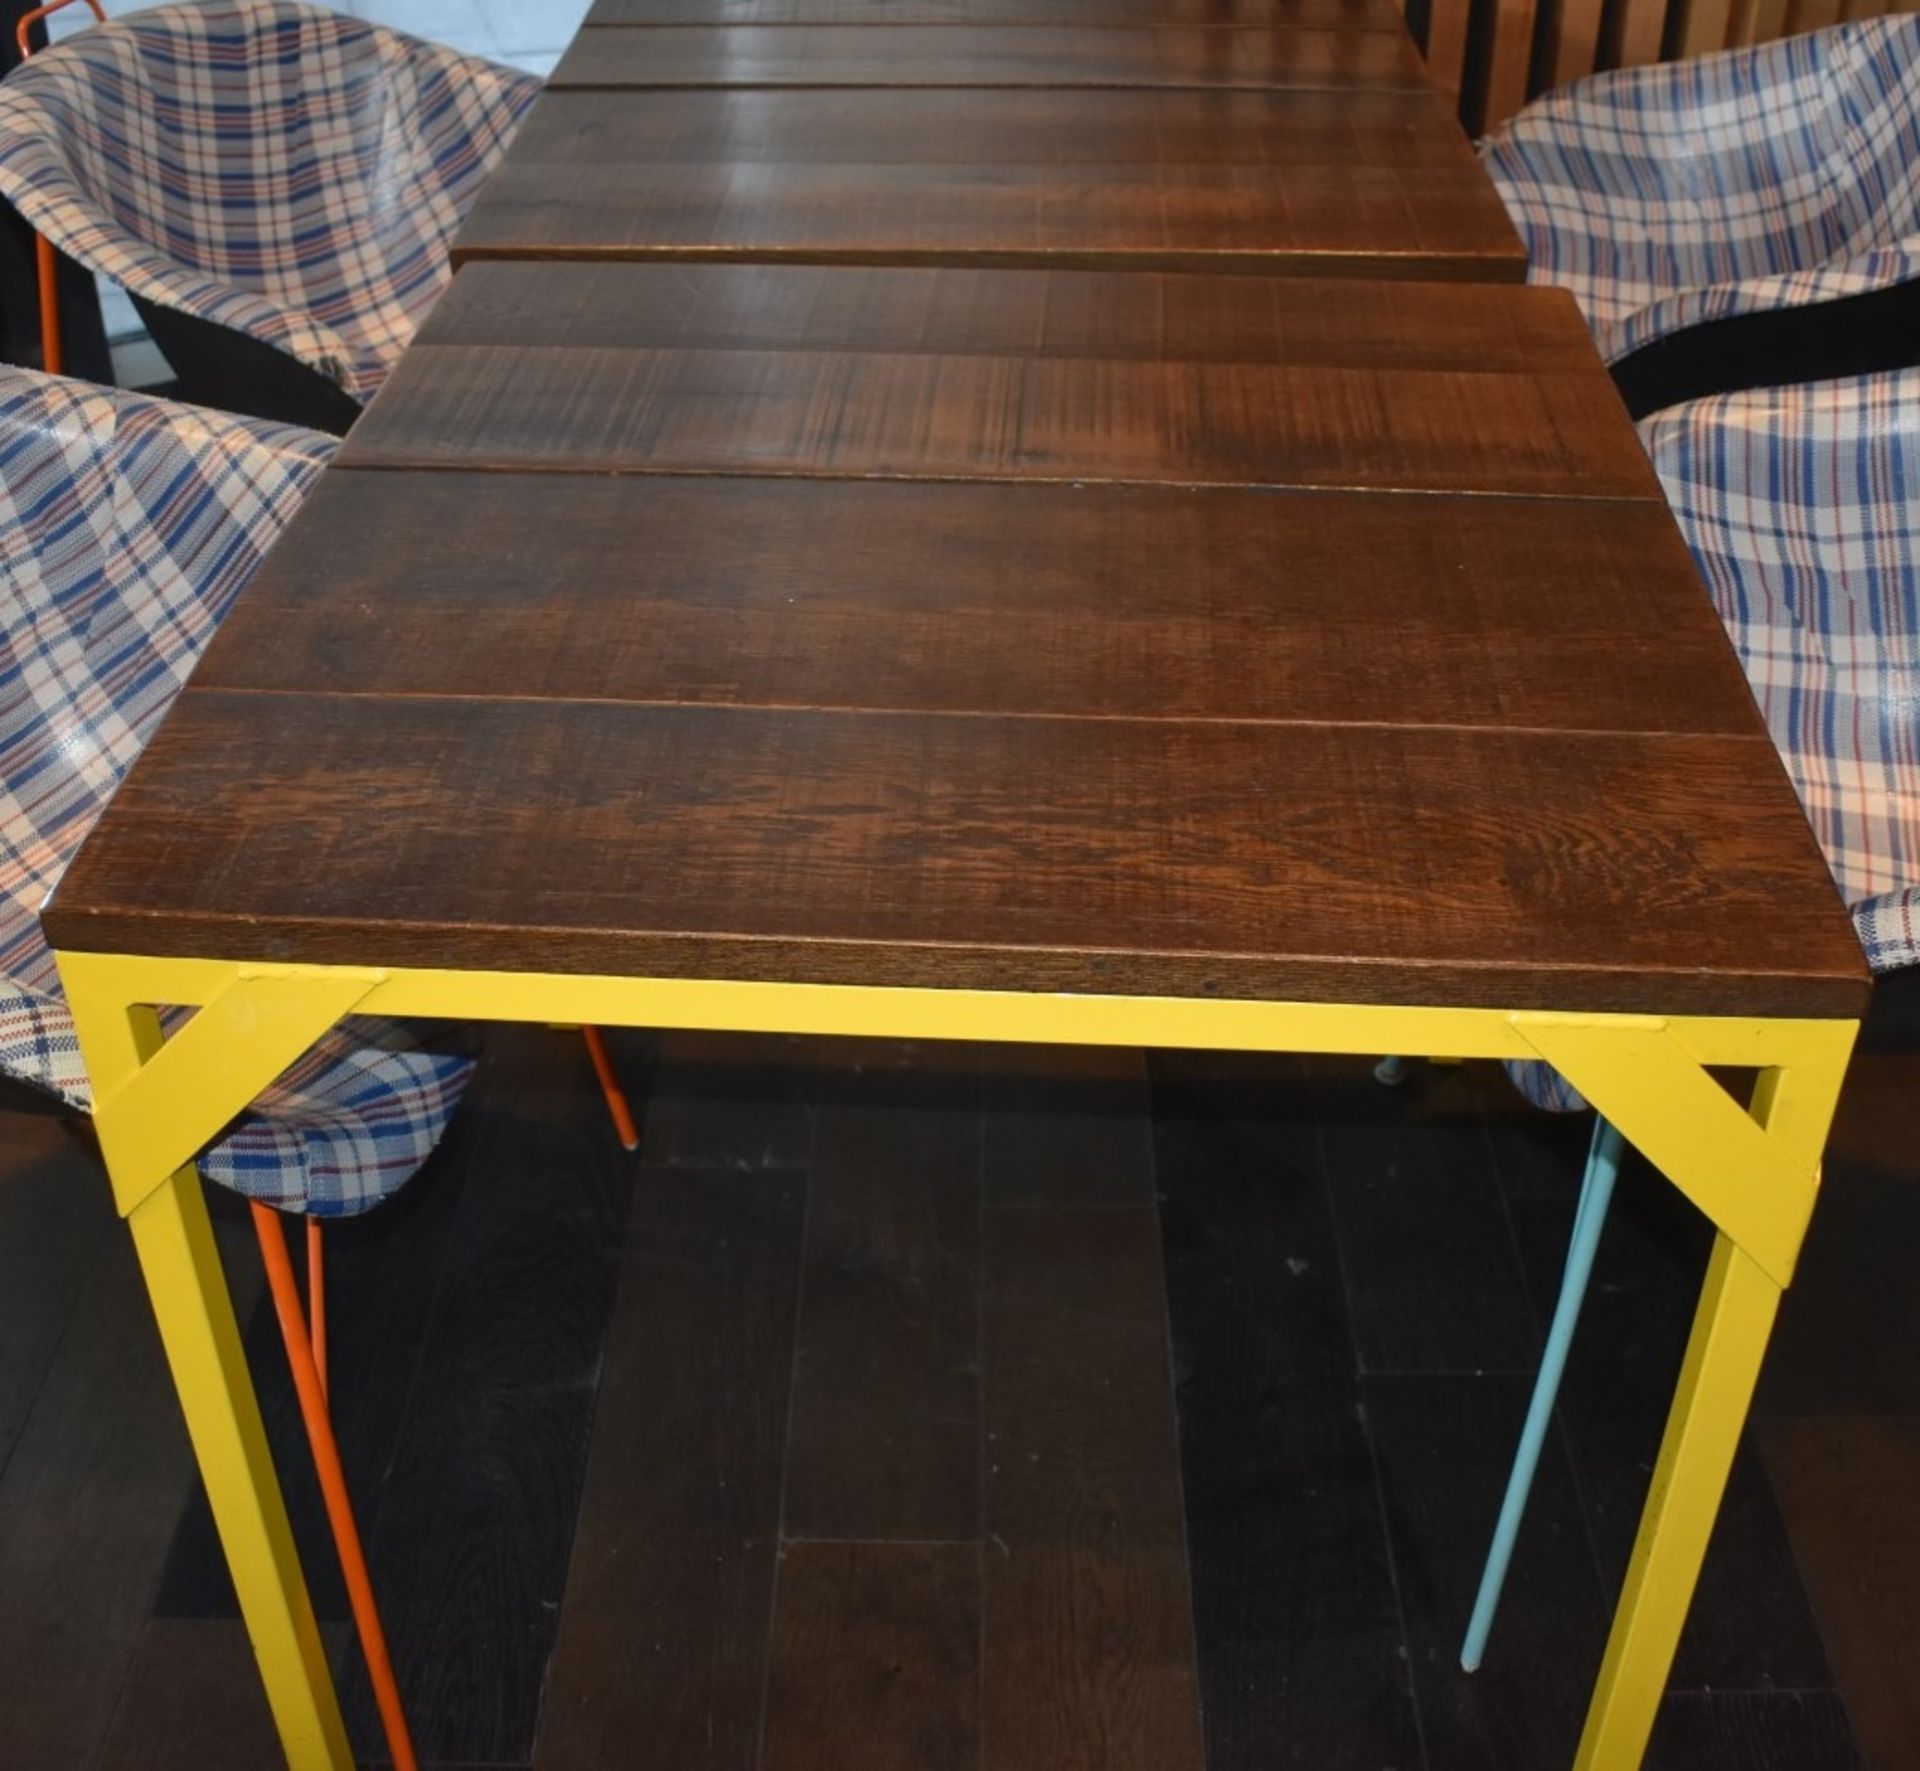 2 x Dining Tables With Bright Yellow Steel Bases and Wooden Panelled Tops - Size: H77  W85 x D85 cms - Image 4 of 4